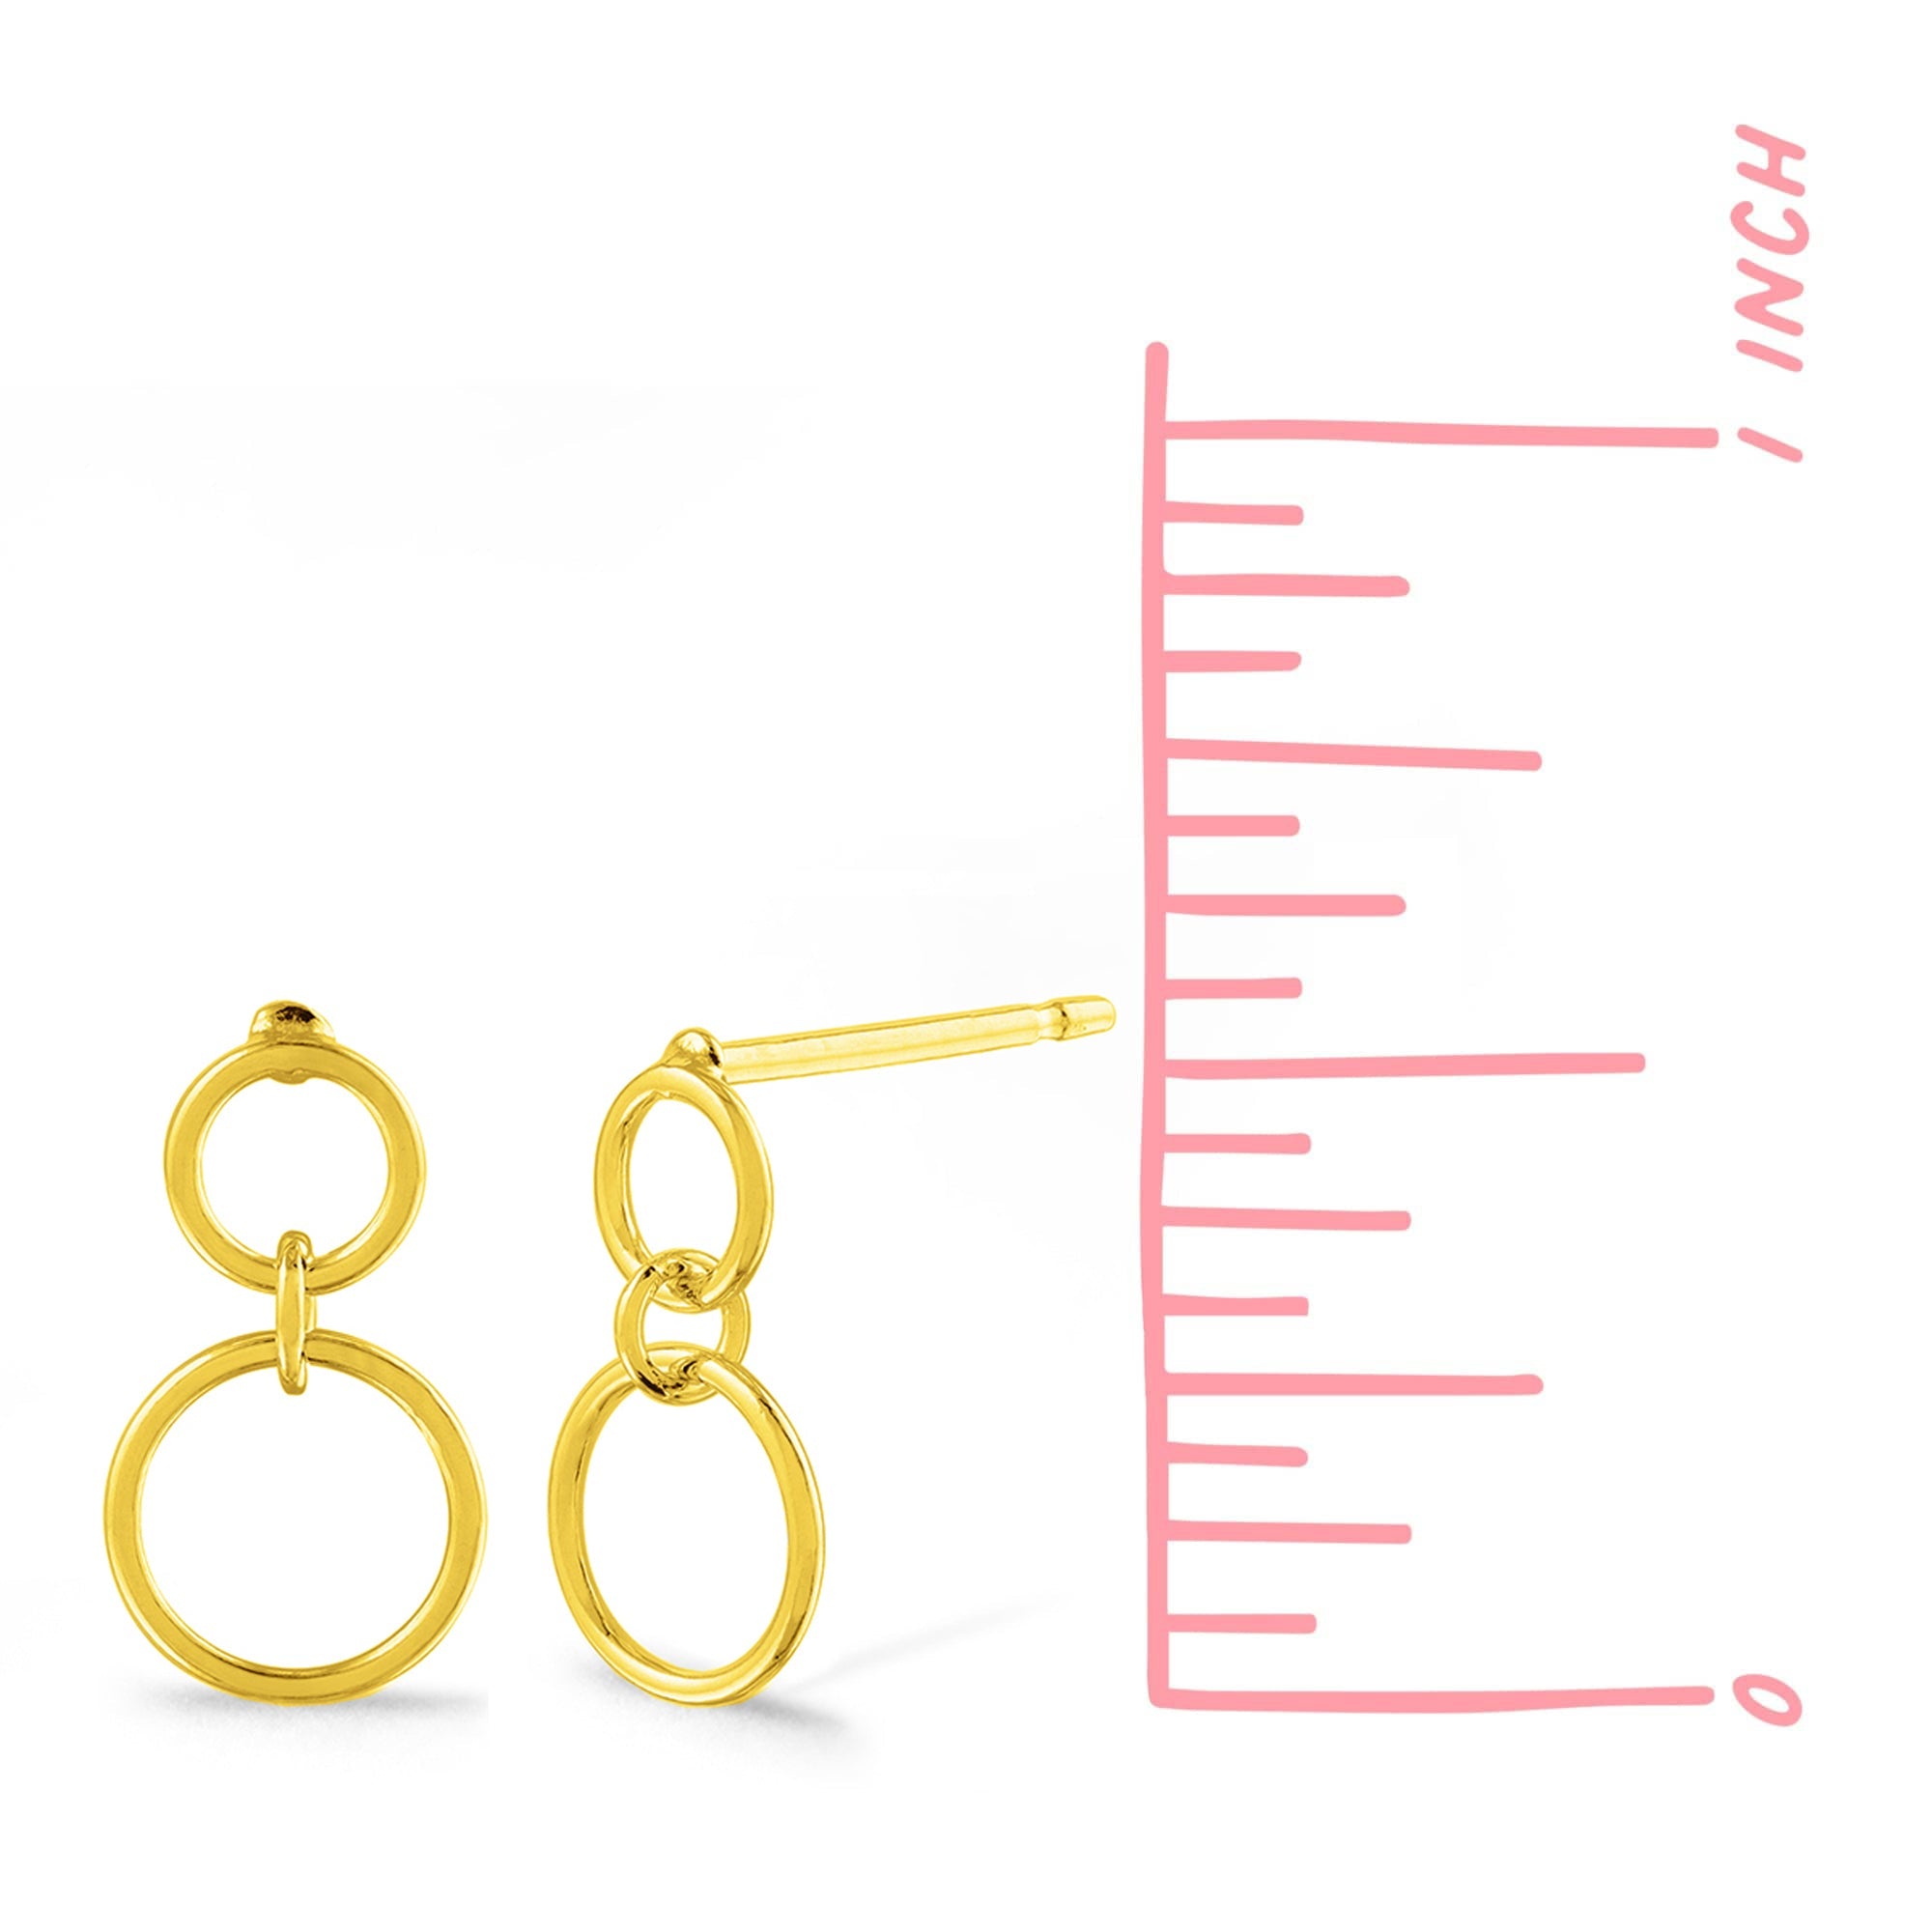 Boma 14KT Gold Plated Double Hoop Post Earrings    